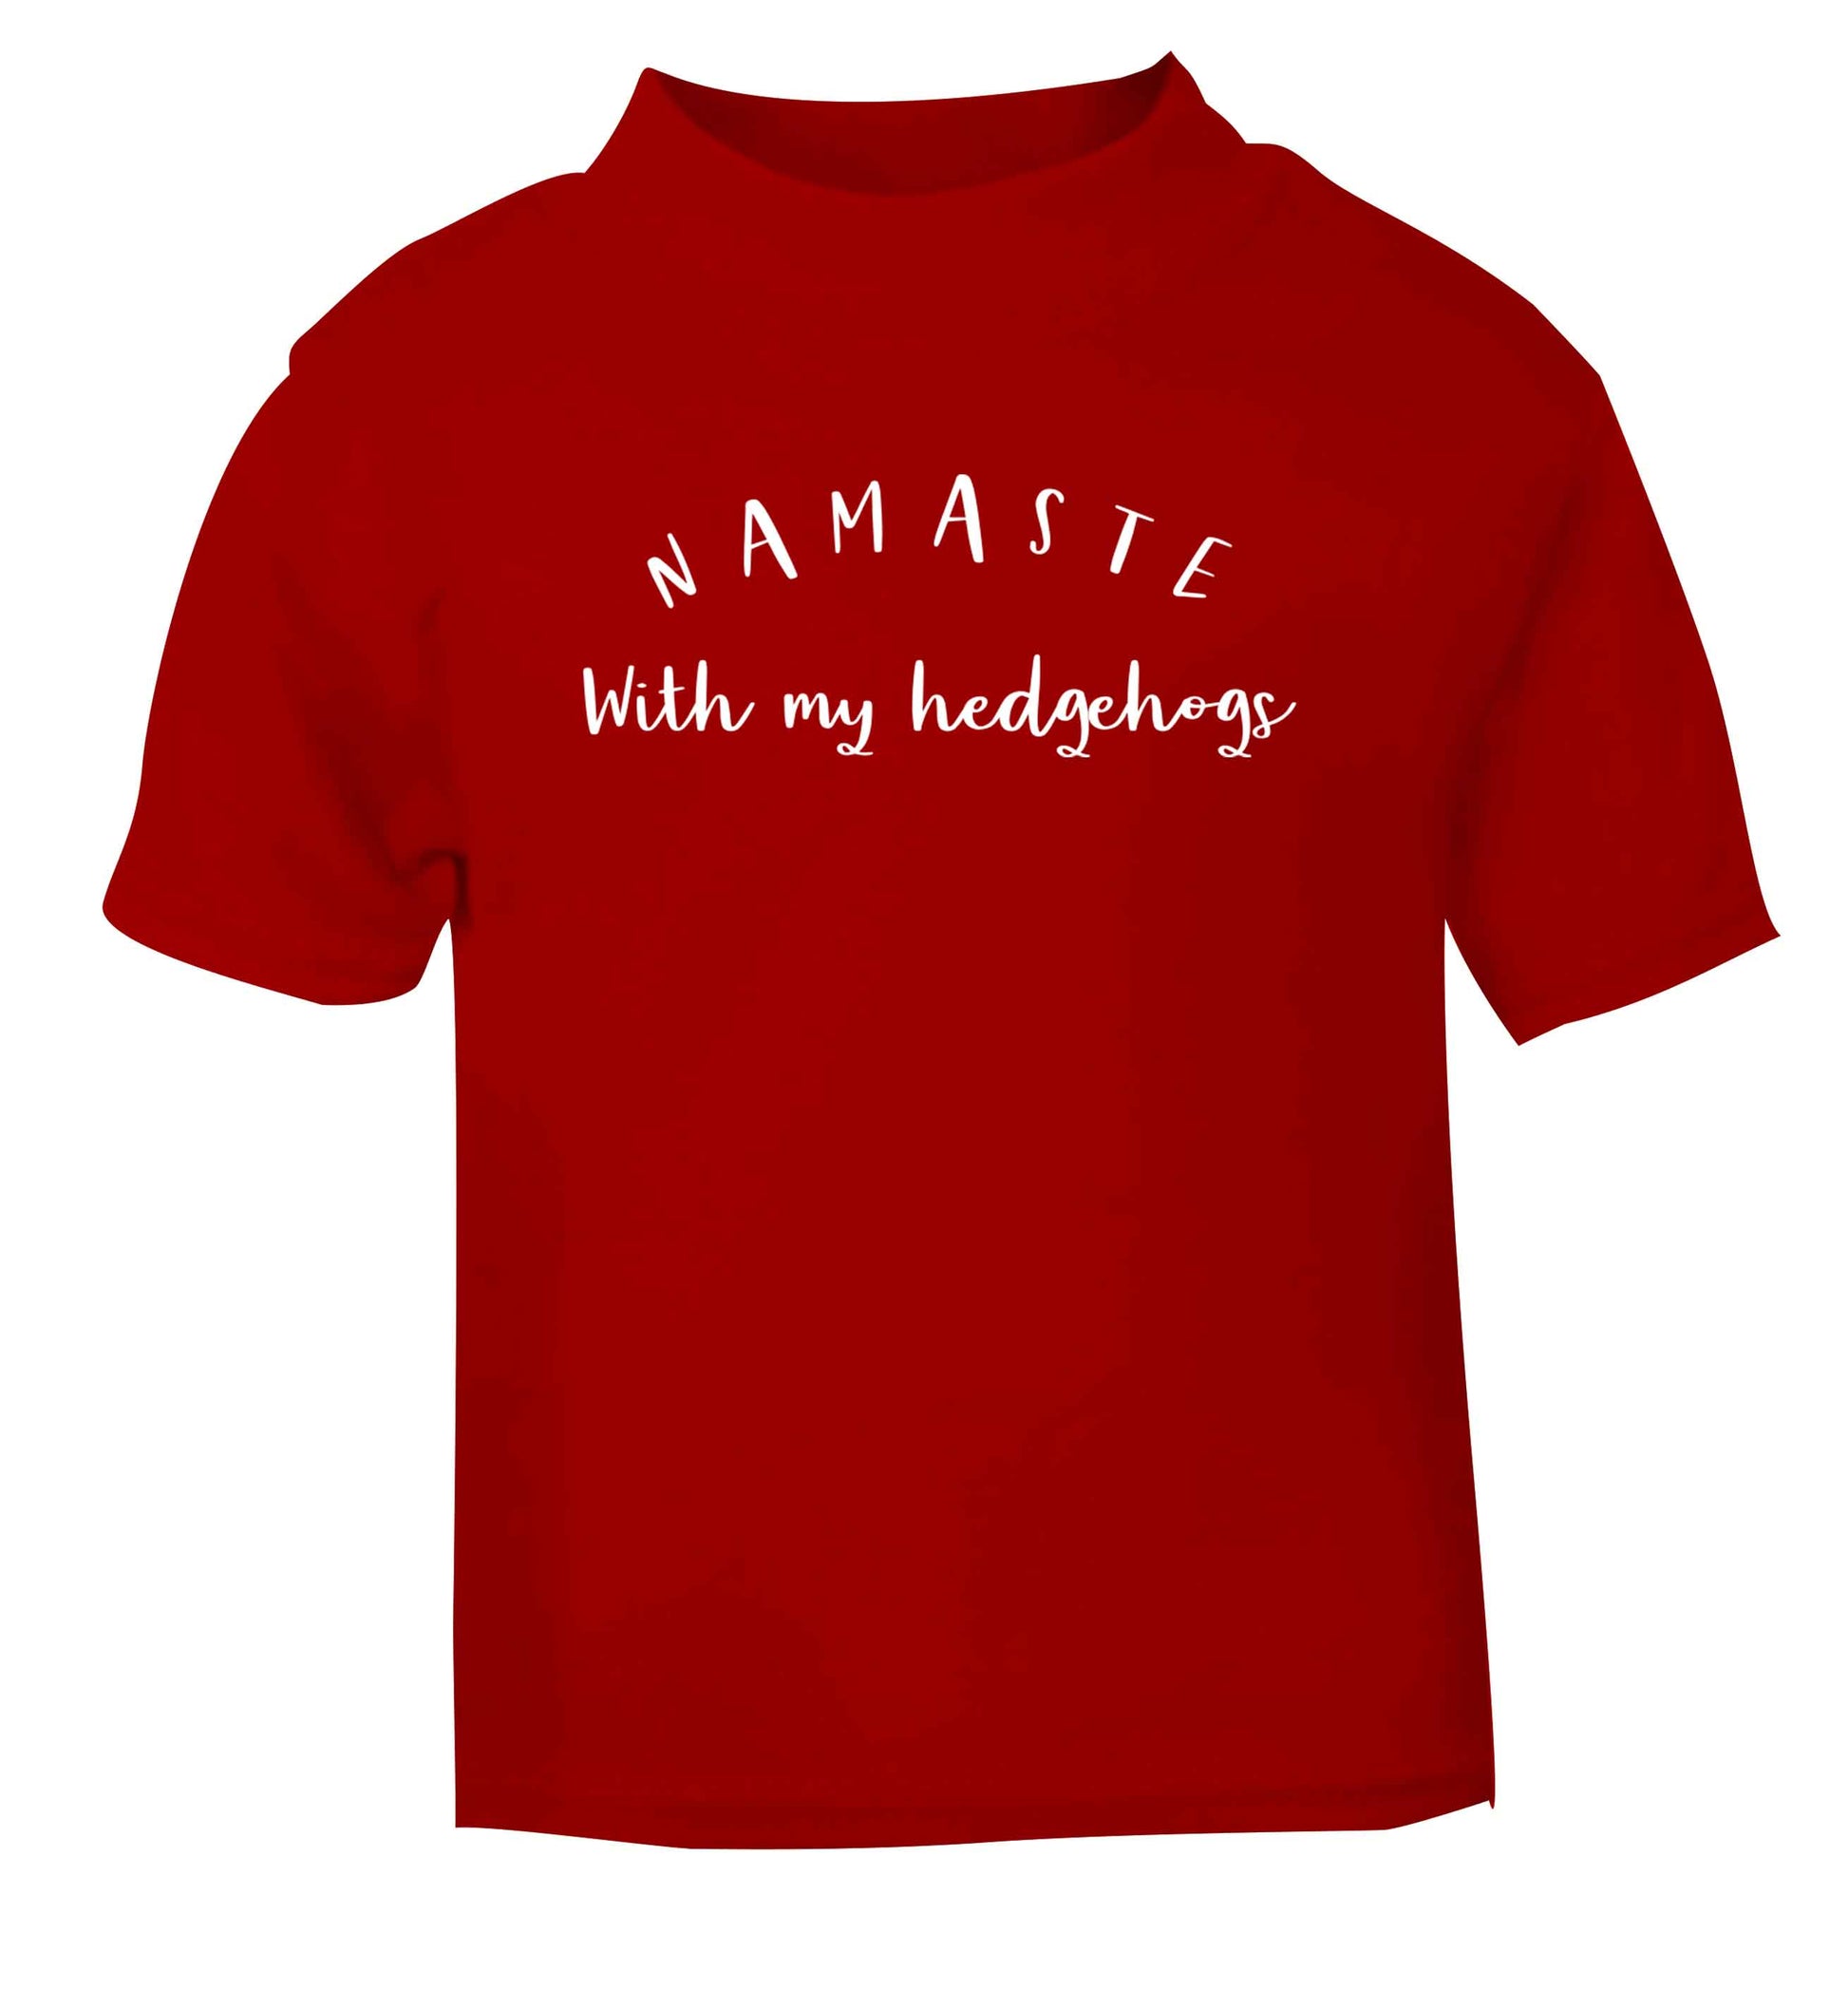 Namaste with my hedgehog red Baby Toddler Tshirt 2 Years